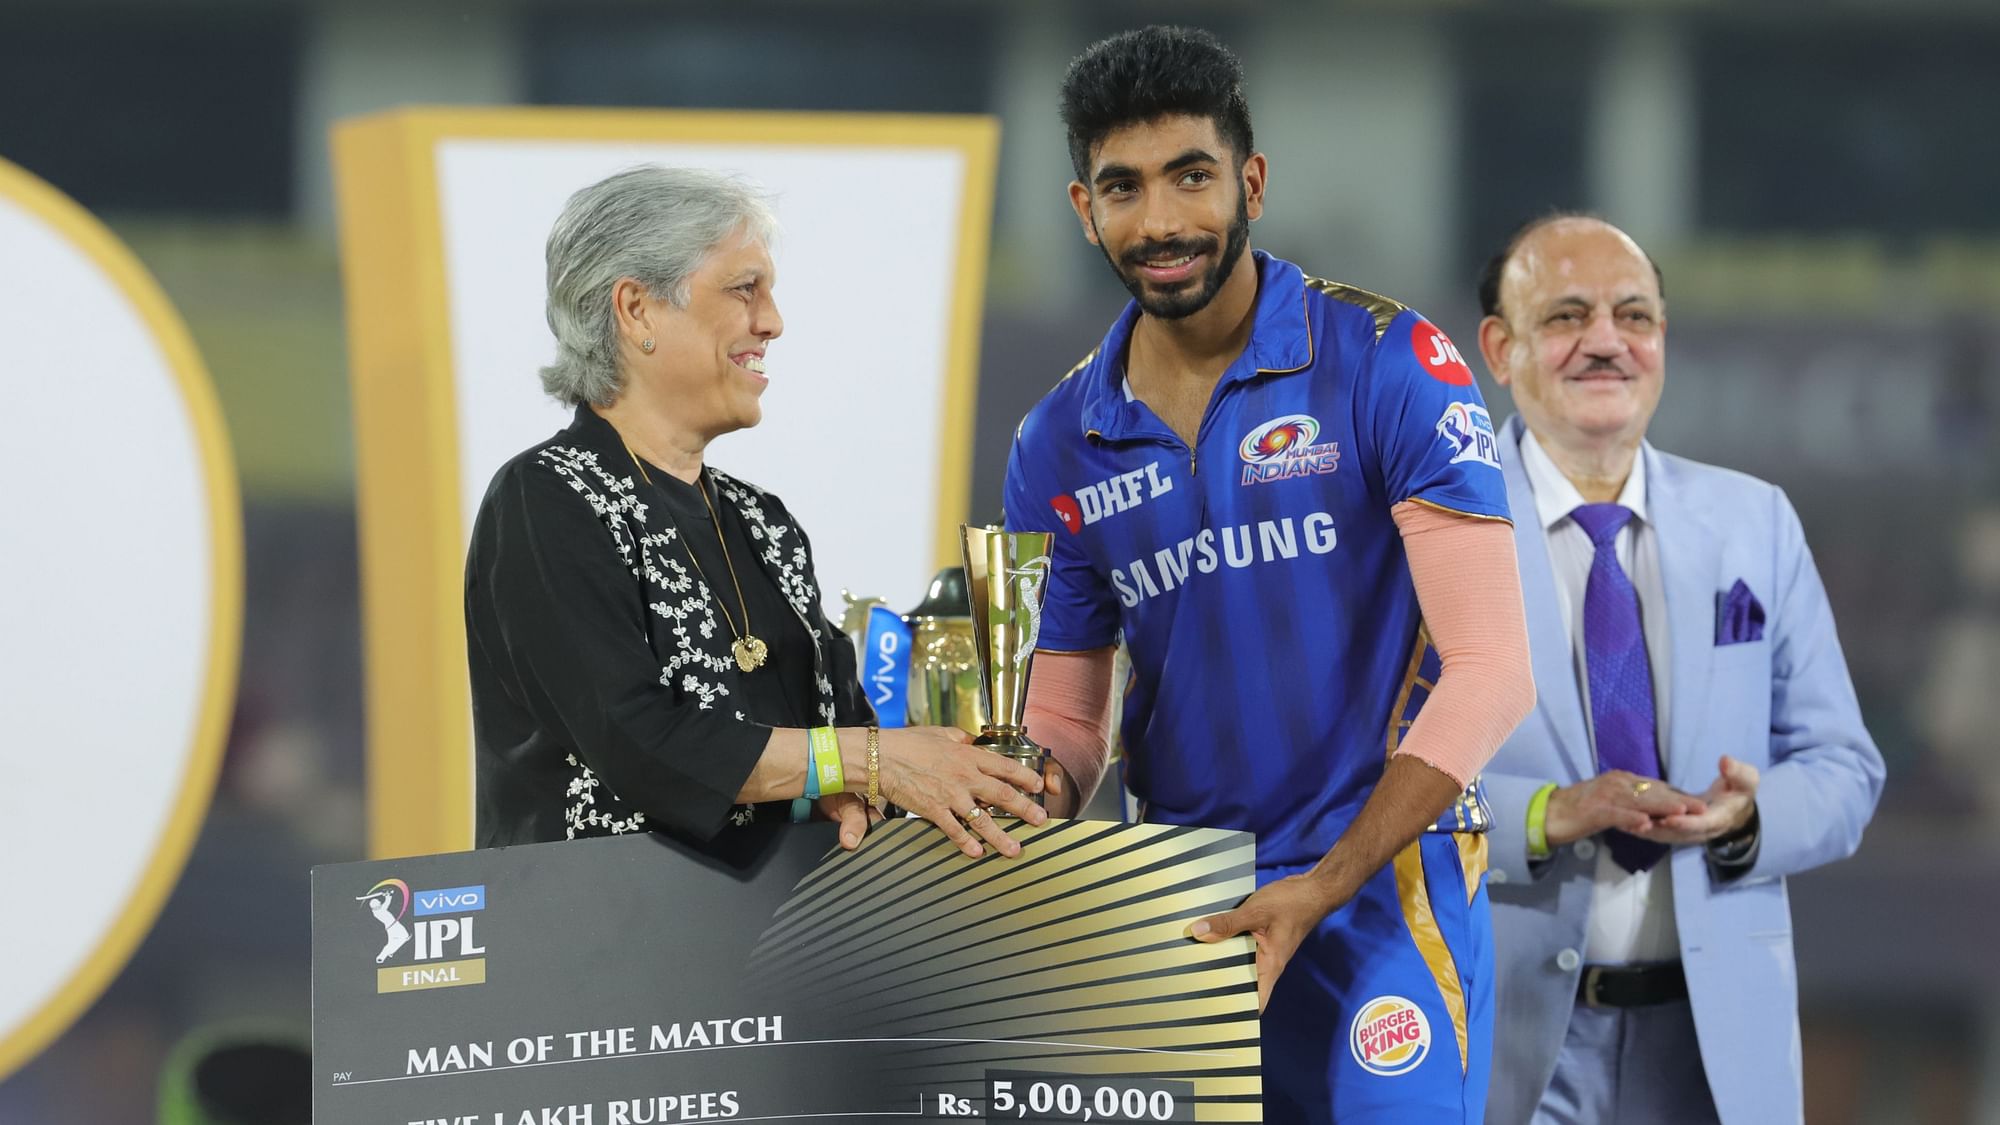 Jasprit Bumrah was named Man of the Match of the IPL 2019 final.